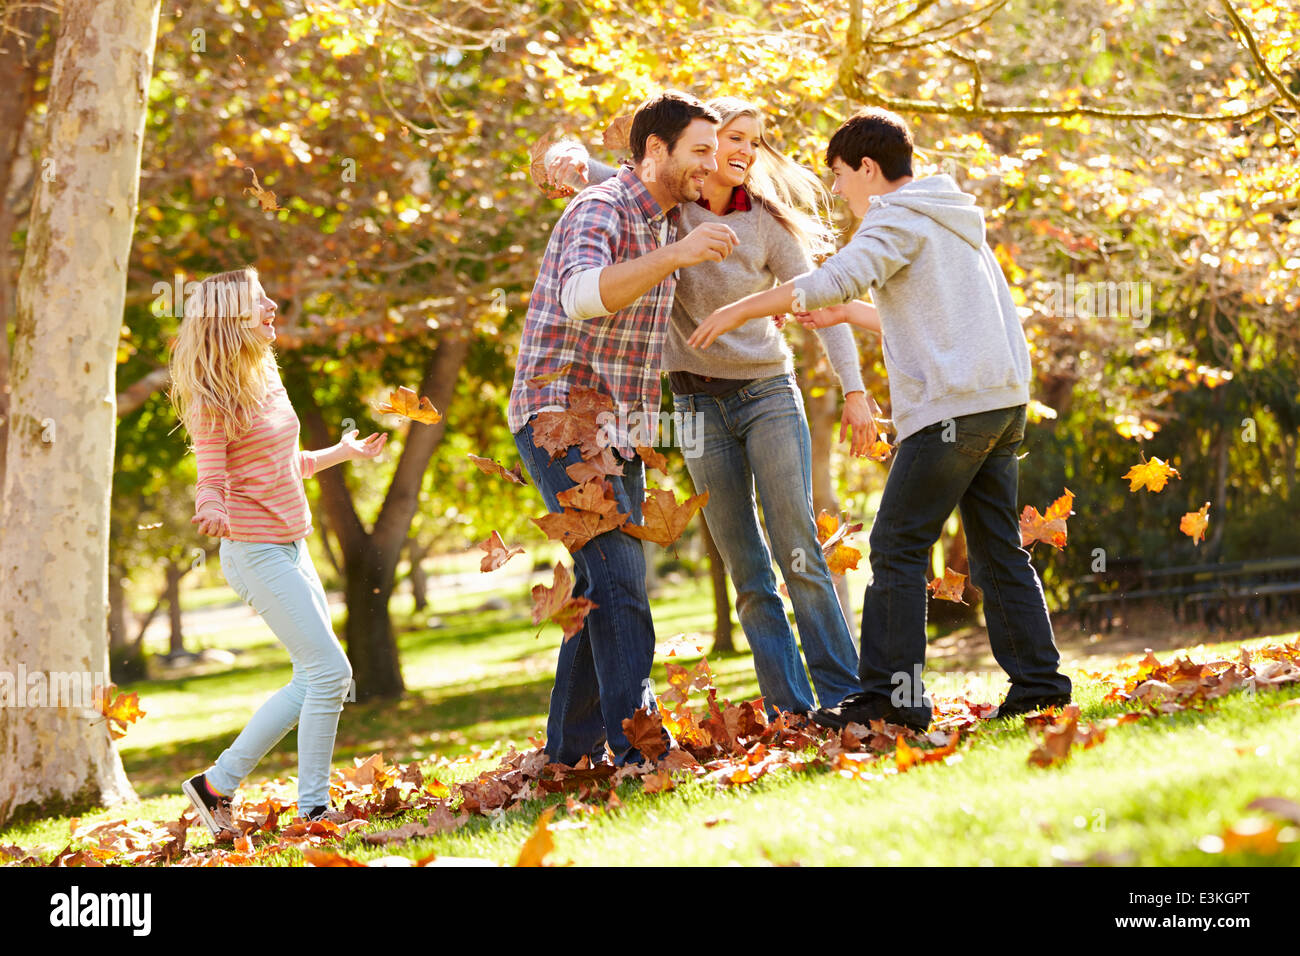 Family Throwing Autumn Leaves In The Air Stock Photo